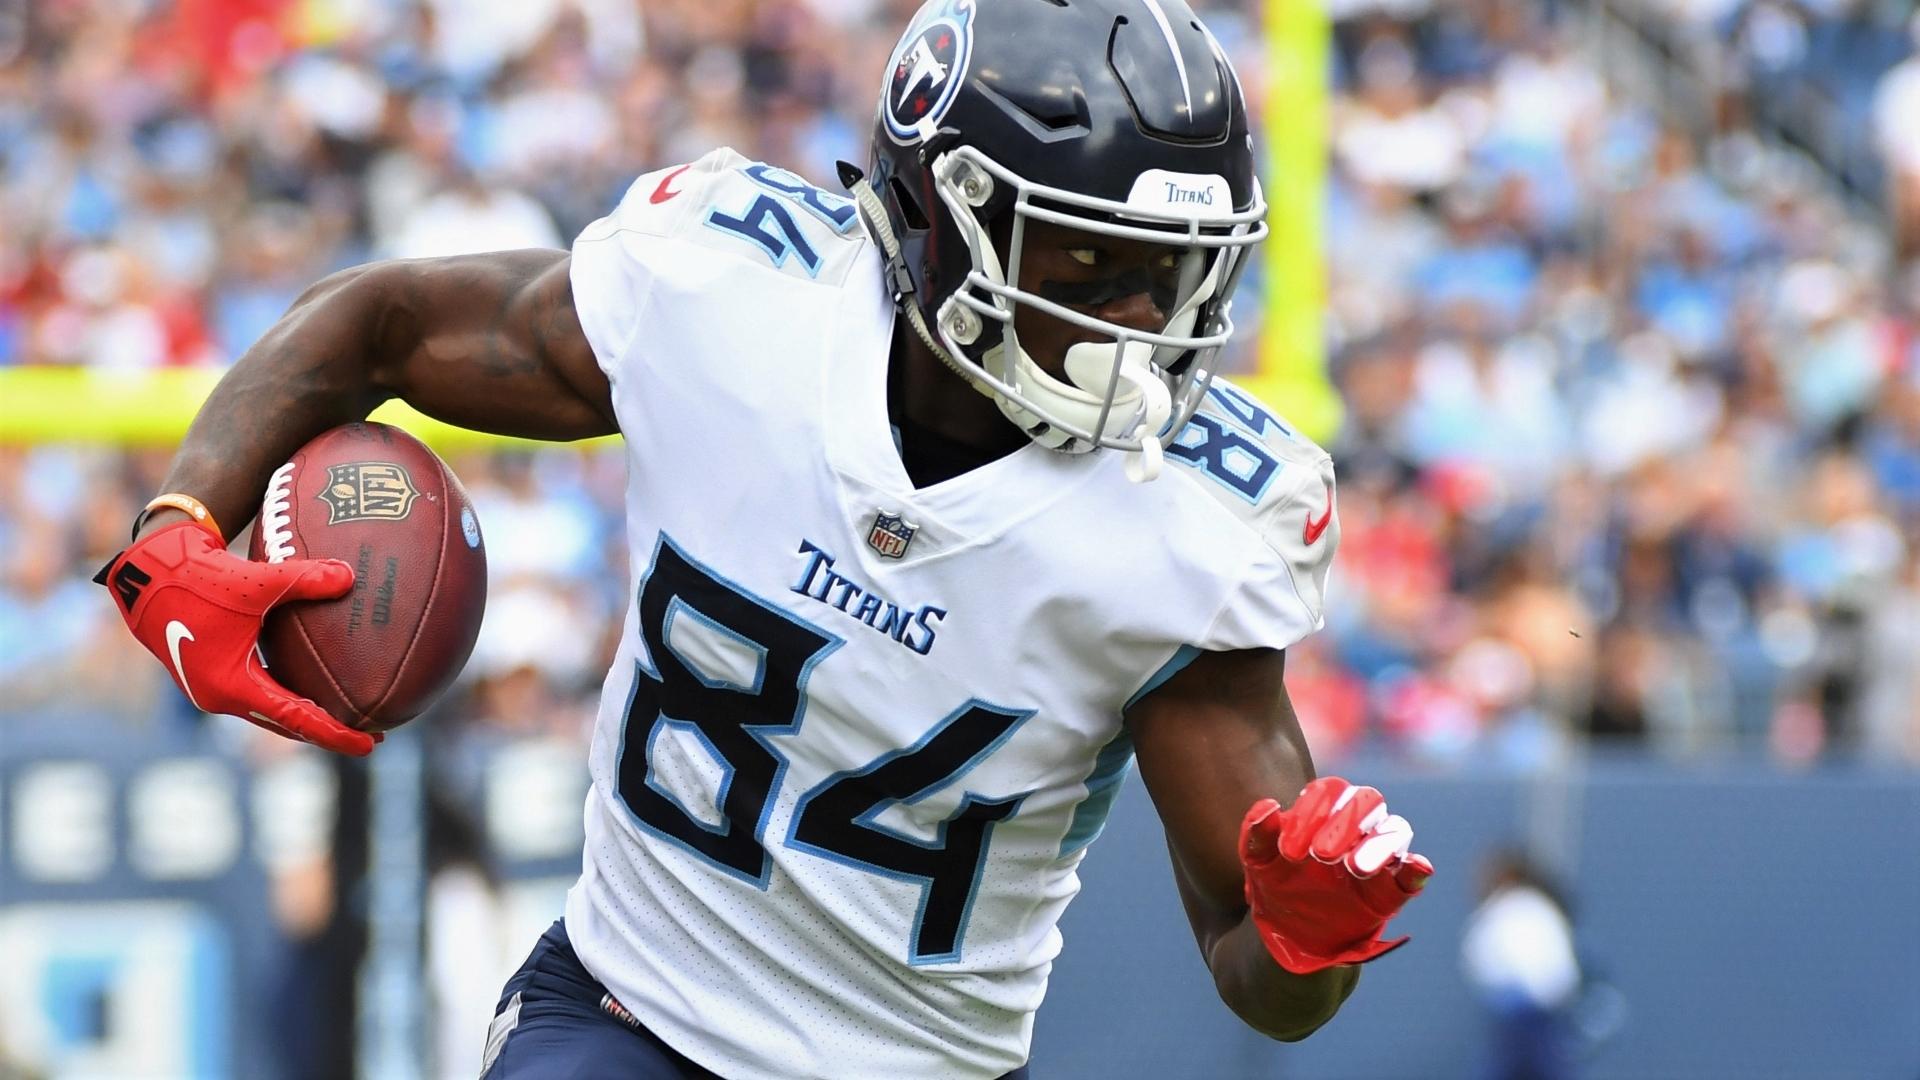 Tennessee Titans wide receiver Corey Davis (84) runs after a catch during the first half against the Houston Texans at Nissan Stadium. Mandatory Credit: Christopher Hanewinckel-USA TODAY Sports / © Christopher Hanewinckel-USA TODAY Sports